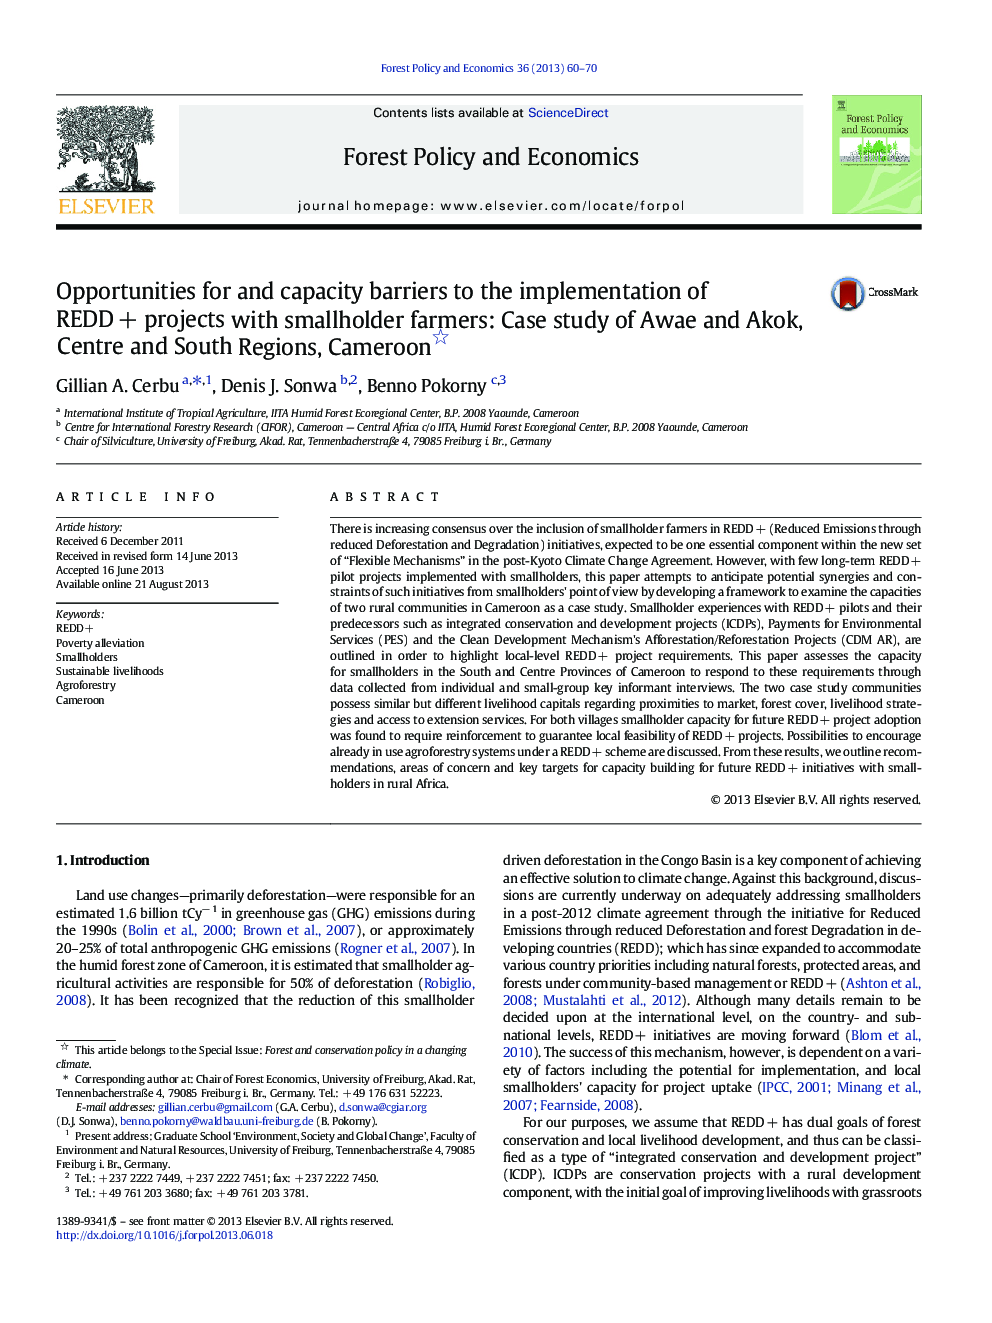 Opportunities for and capacity barriers to the implementation of REDD + projects with smallholder farmers: Case study of Awae and Akok, Centre and South Regions, Cameroon 